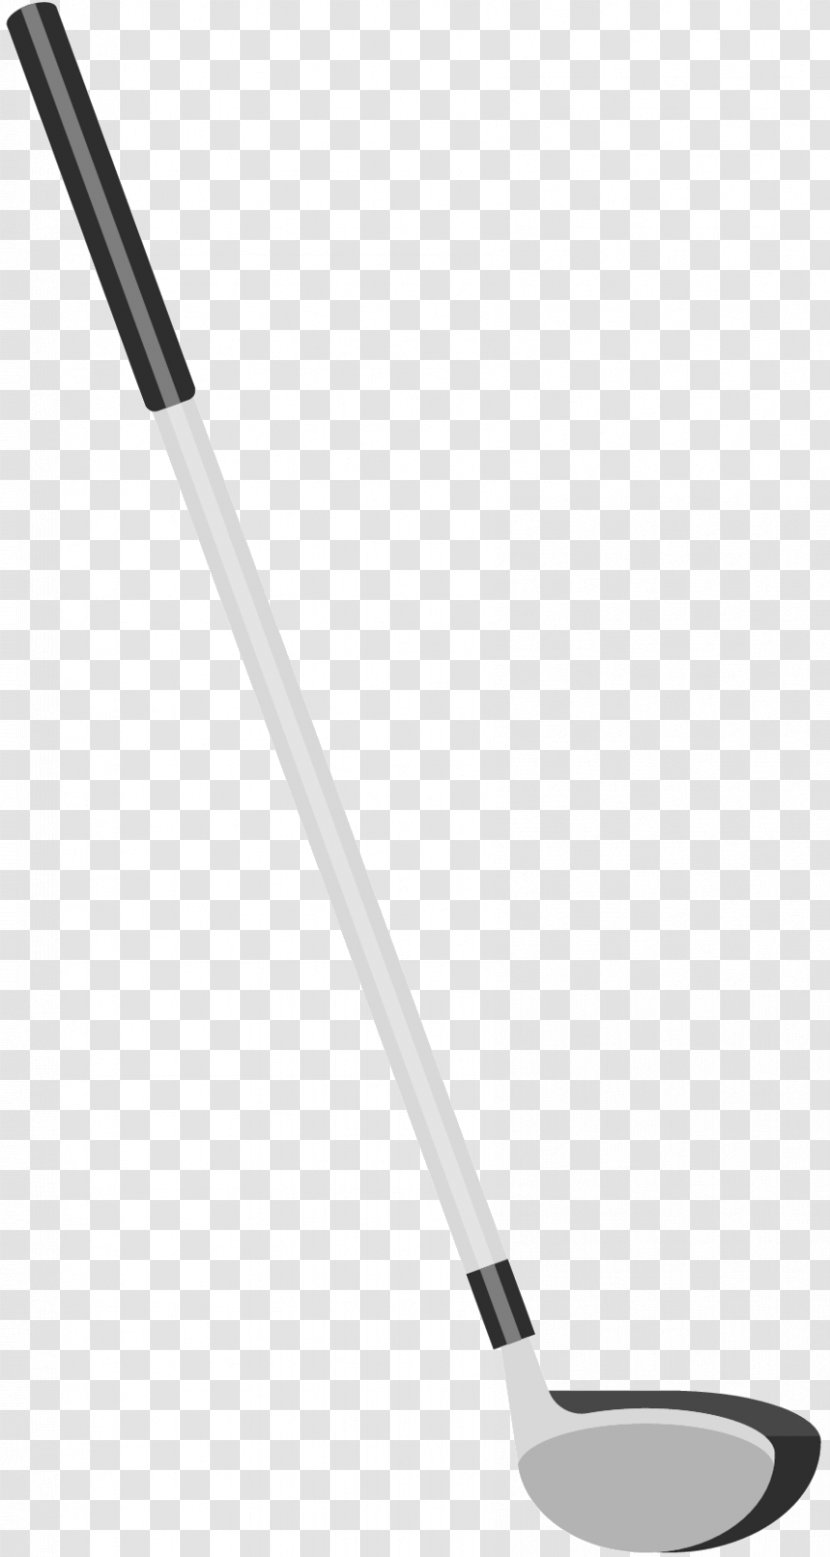 Cutlery Product Design Line Sports - Equipment - Golf Club Transparent PNG